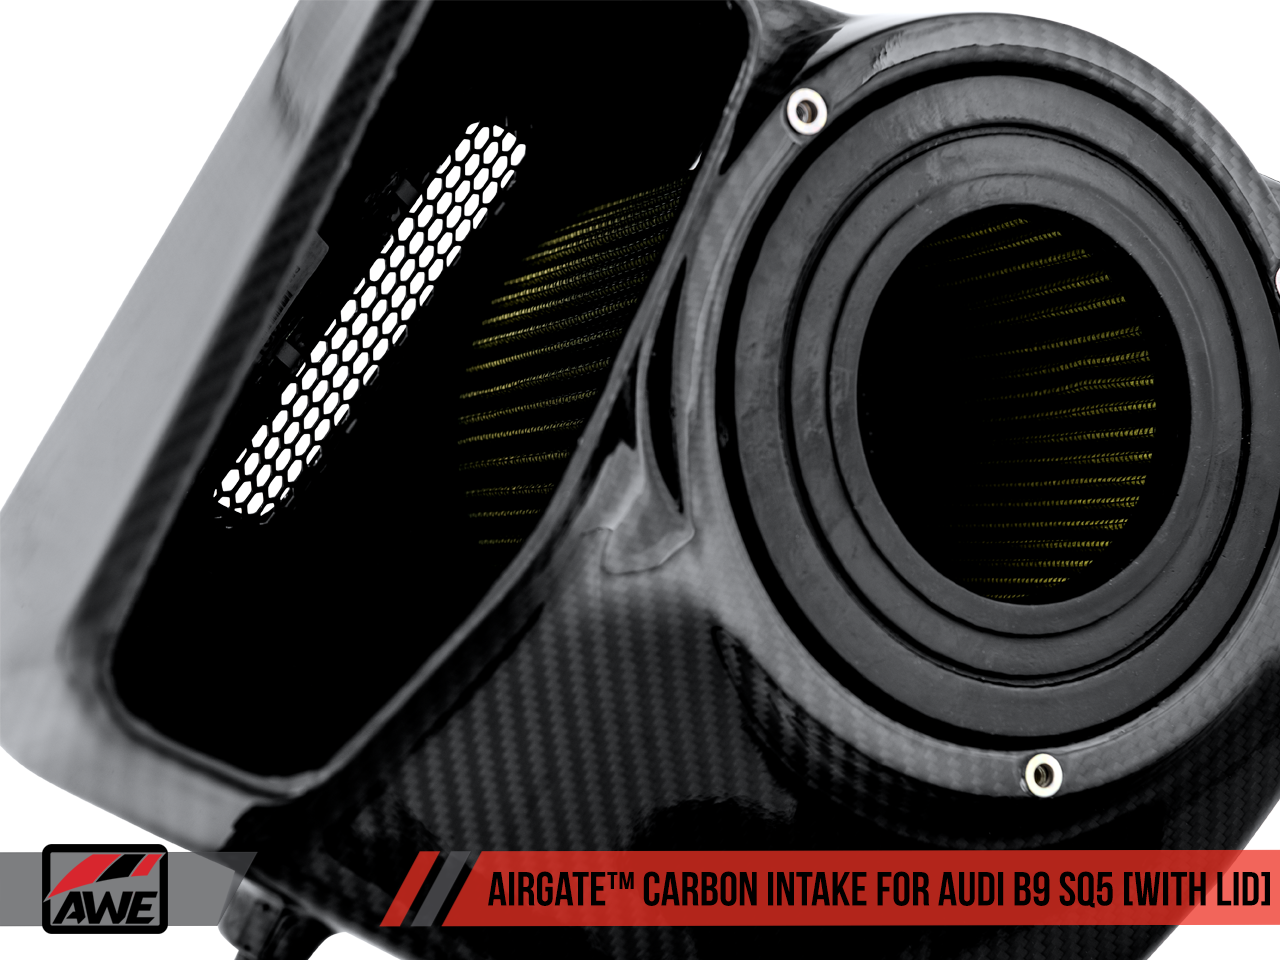 AirGate Carbon Fiber Intake for Audi B9 SQ5 3.0T - With Lid